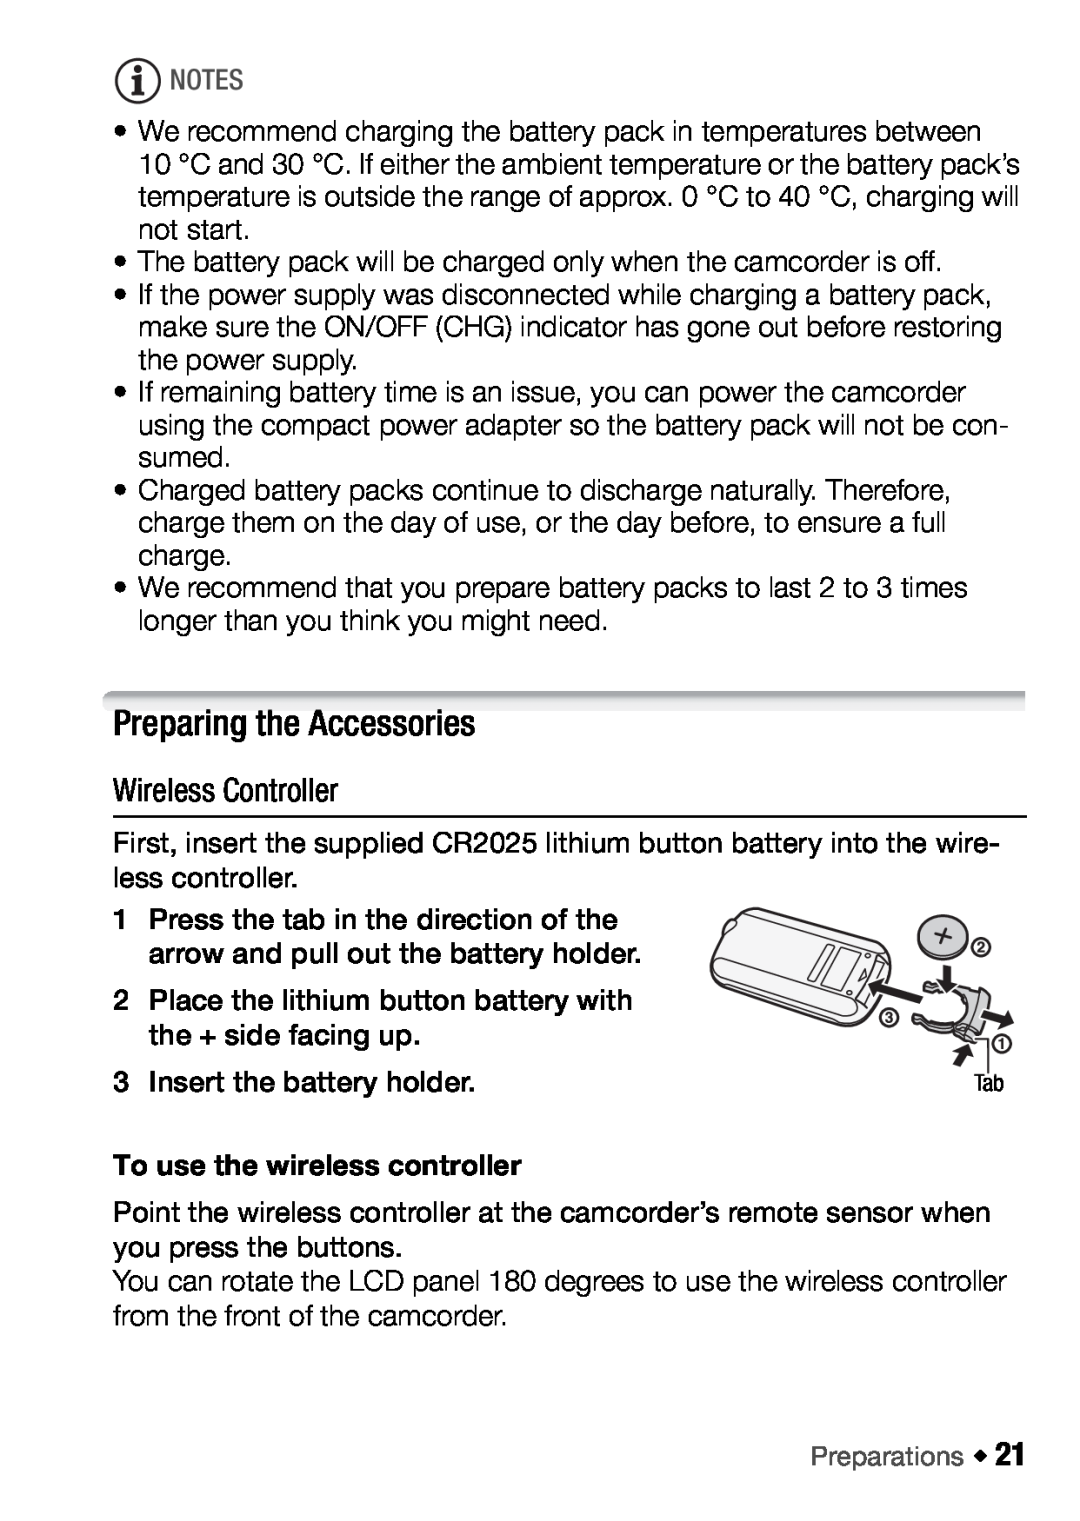 Canon HFM46, HFM406 instruction manual Preparing the Accessories, Wireless Controller, To use the wireless controller 